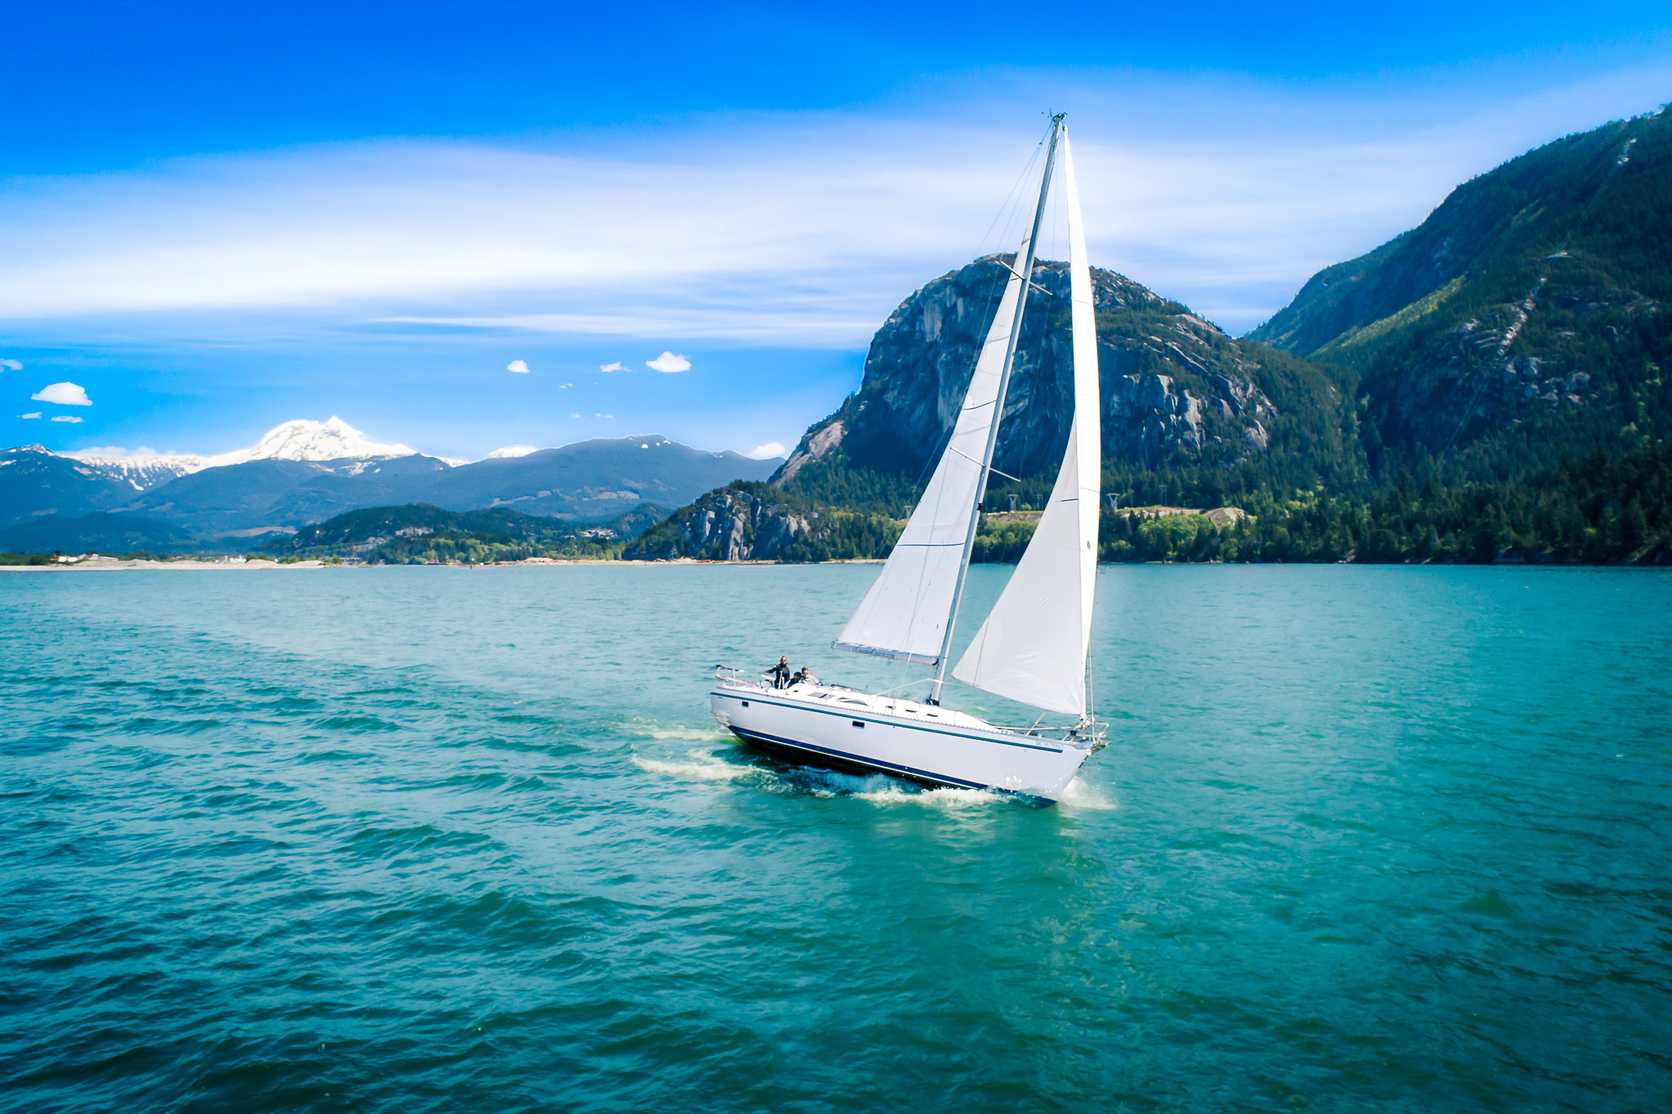 "Sailing in the Legendary Squamish Winds"